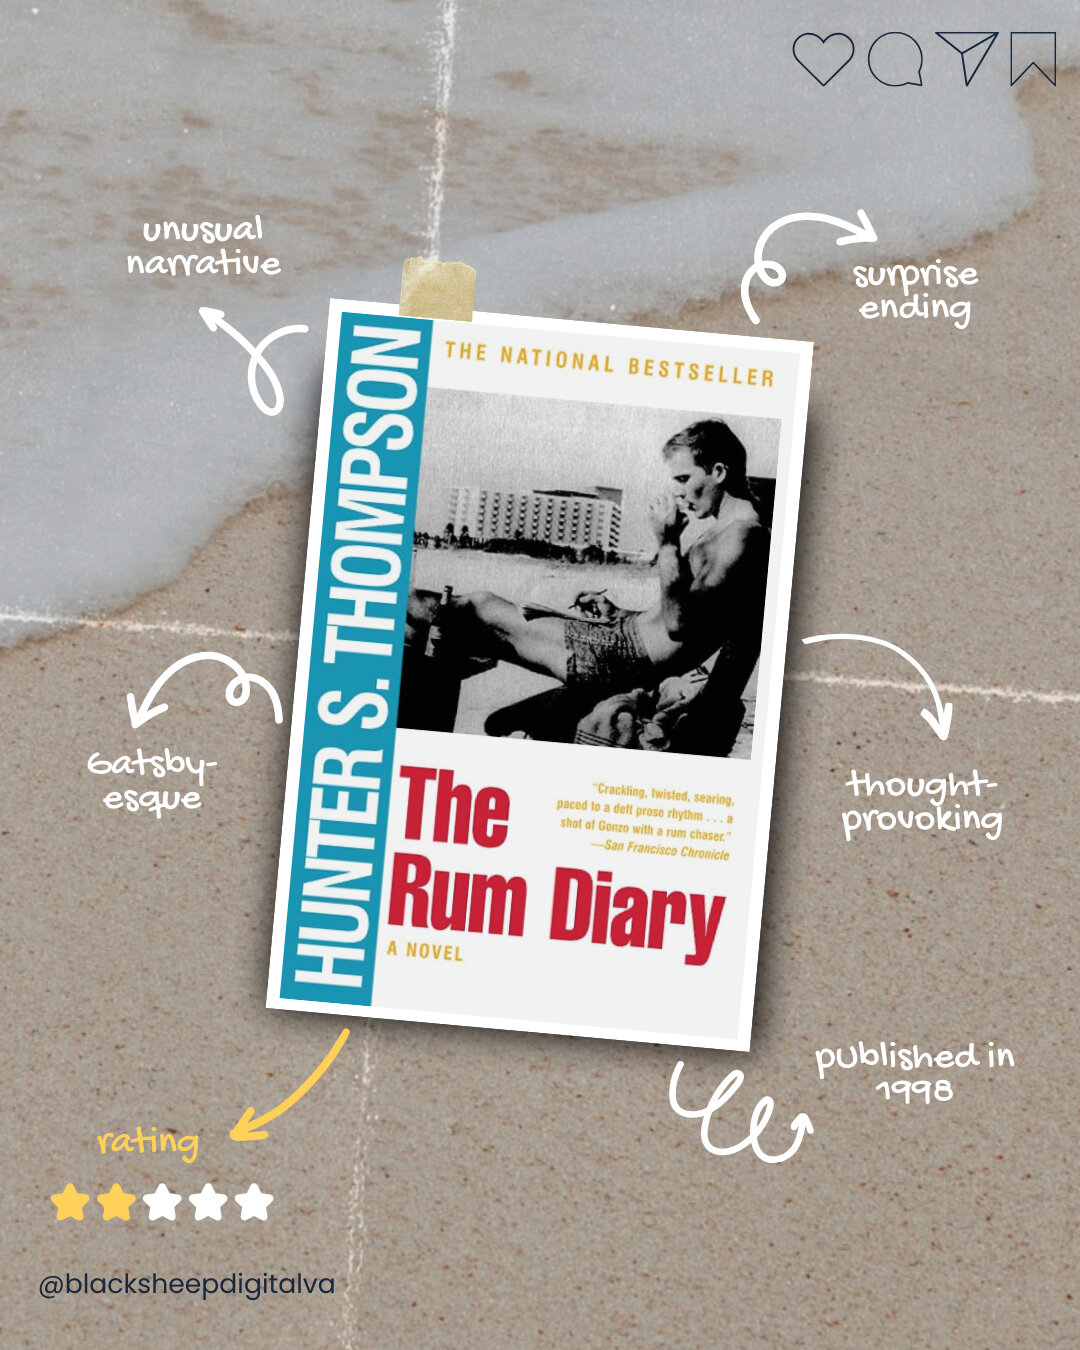 Debating about changing my rating 🤔 Here's why 👇🏻⁣
The Rum Diary was September's pick for my book club. I was not too pleased once I learned we'd be reading it because I had read the description and didn't feel pulled in by the feel of the story. 